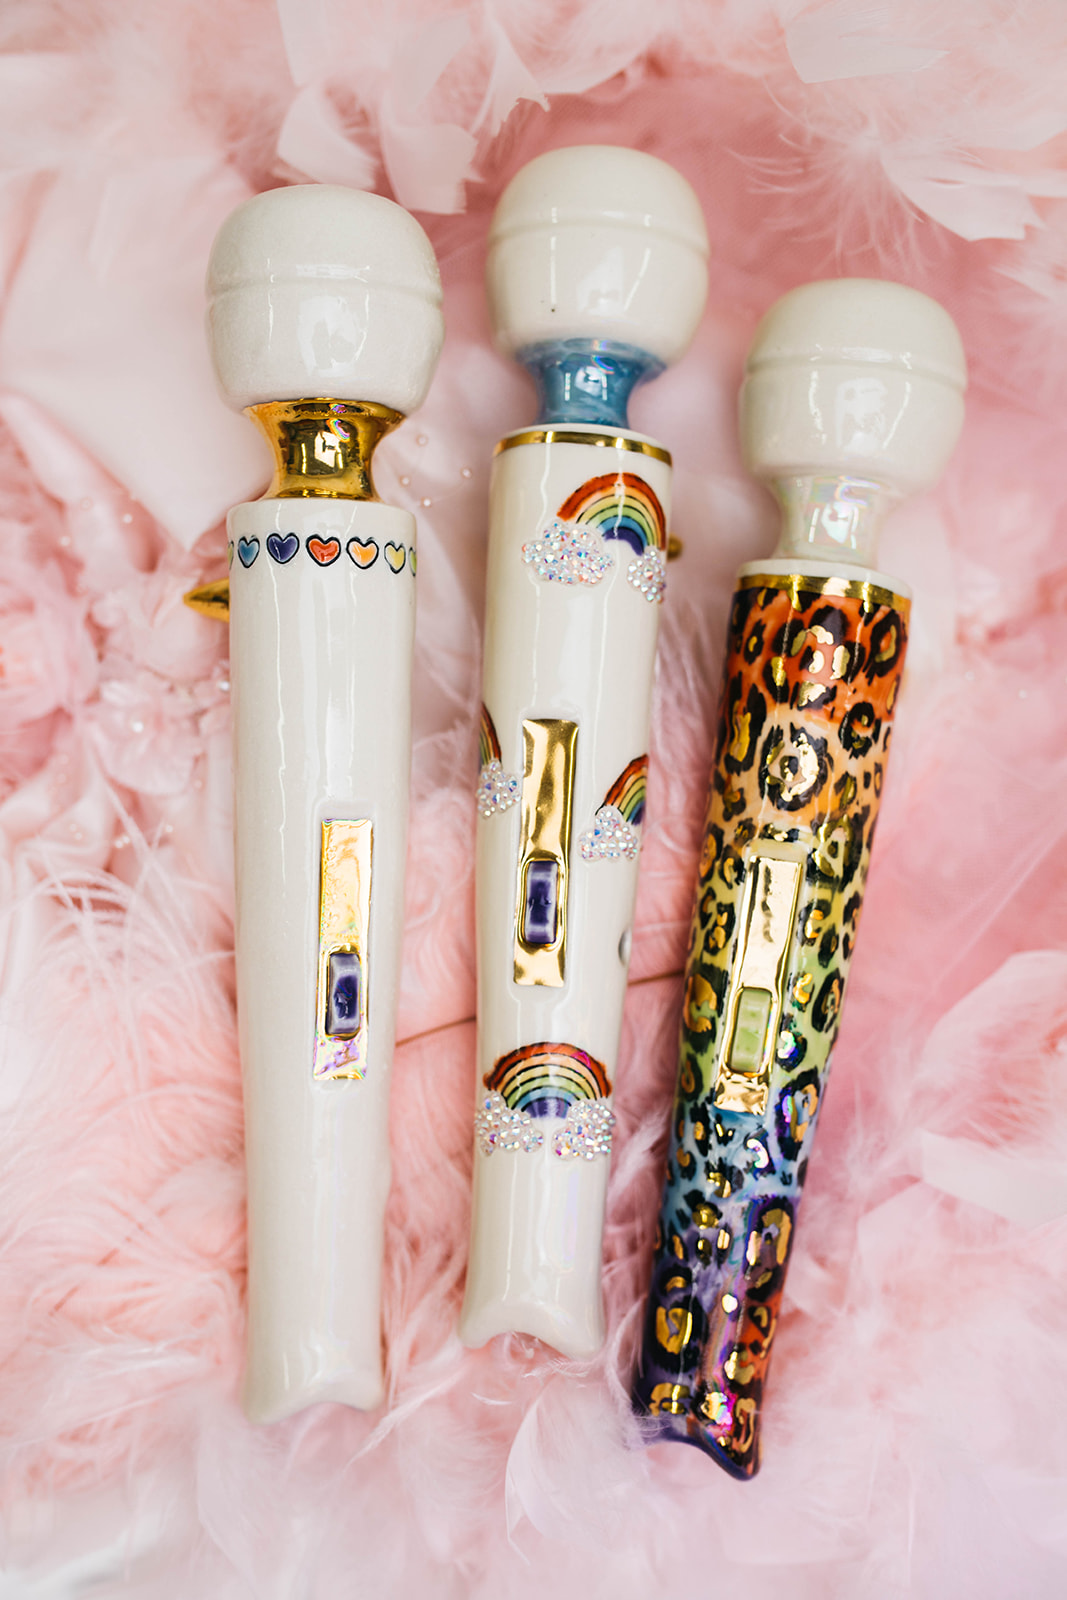 Three of the stunning Magic Wand inhaler pipes bedazzled with rainbows, leopard prints, and hearts.